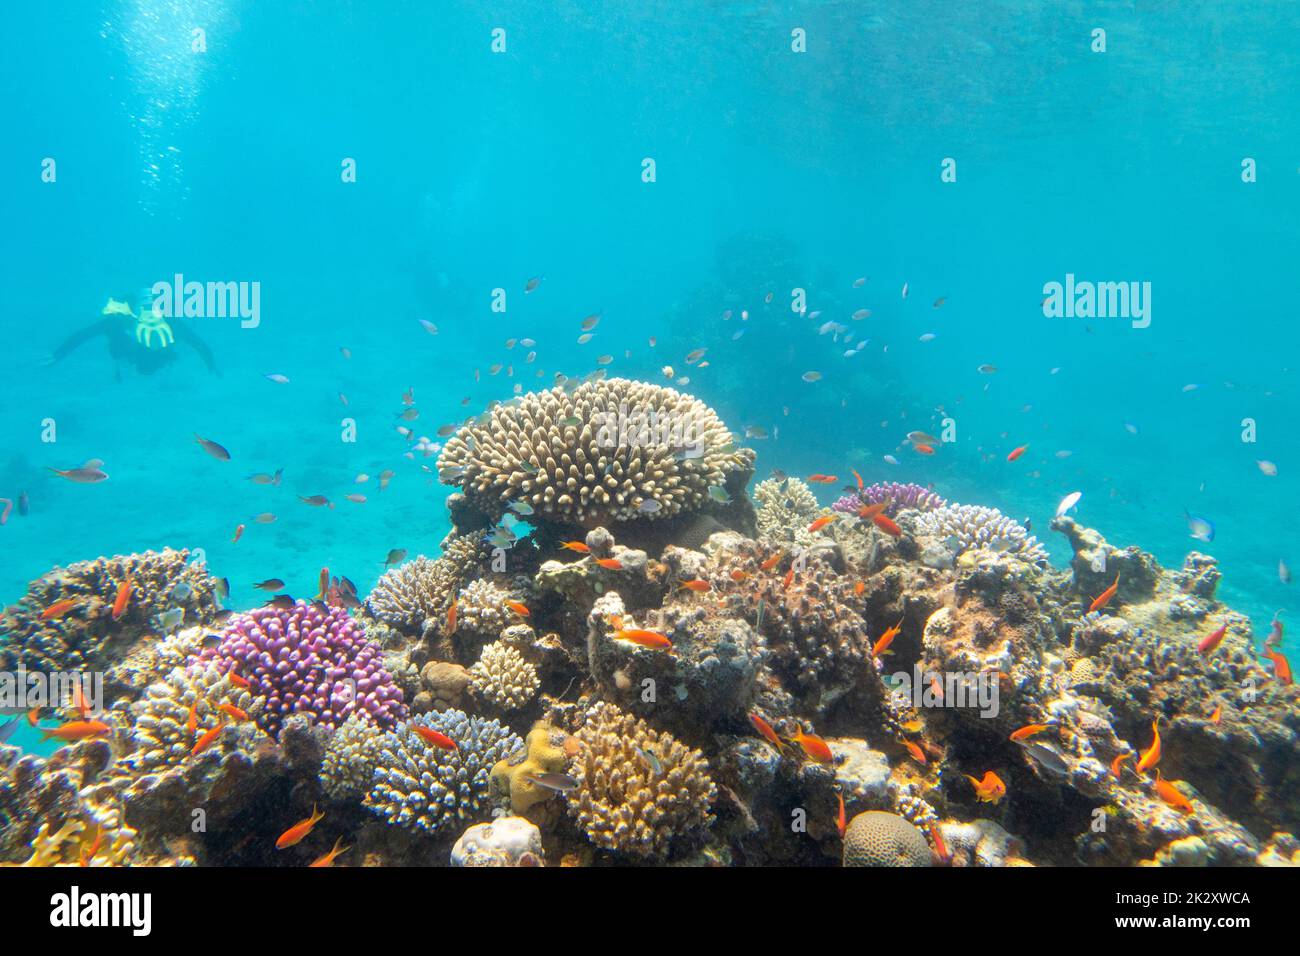 Colorful, picturesque coral reef at the sandy bottom of tropical sea, hard corals with green chromis fishes, underwater landscape Stock Photo